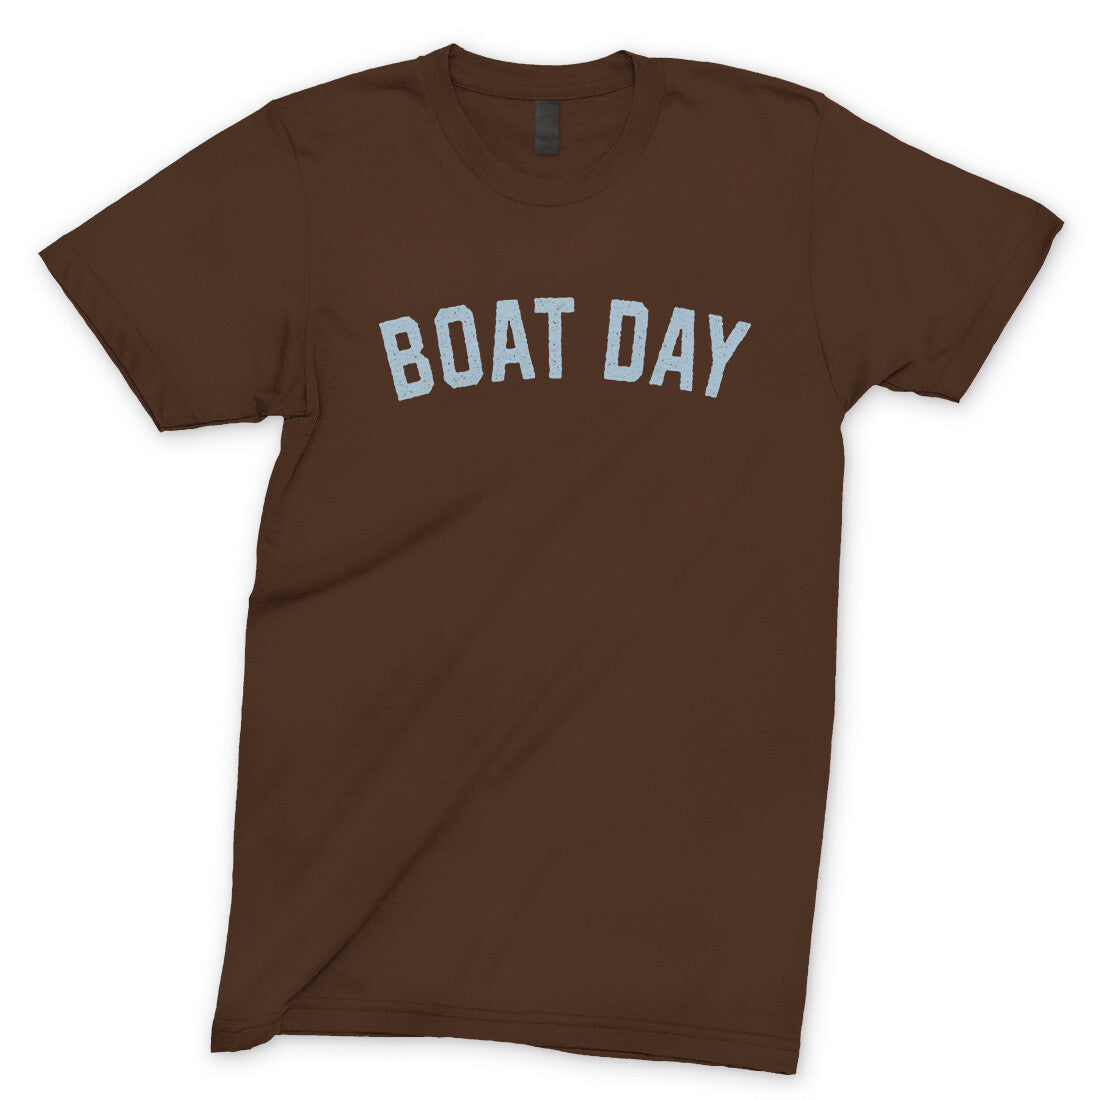 Boat Day in Dark Chocolate Color